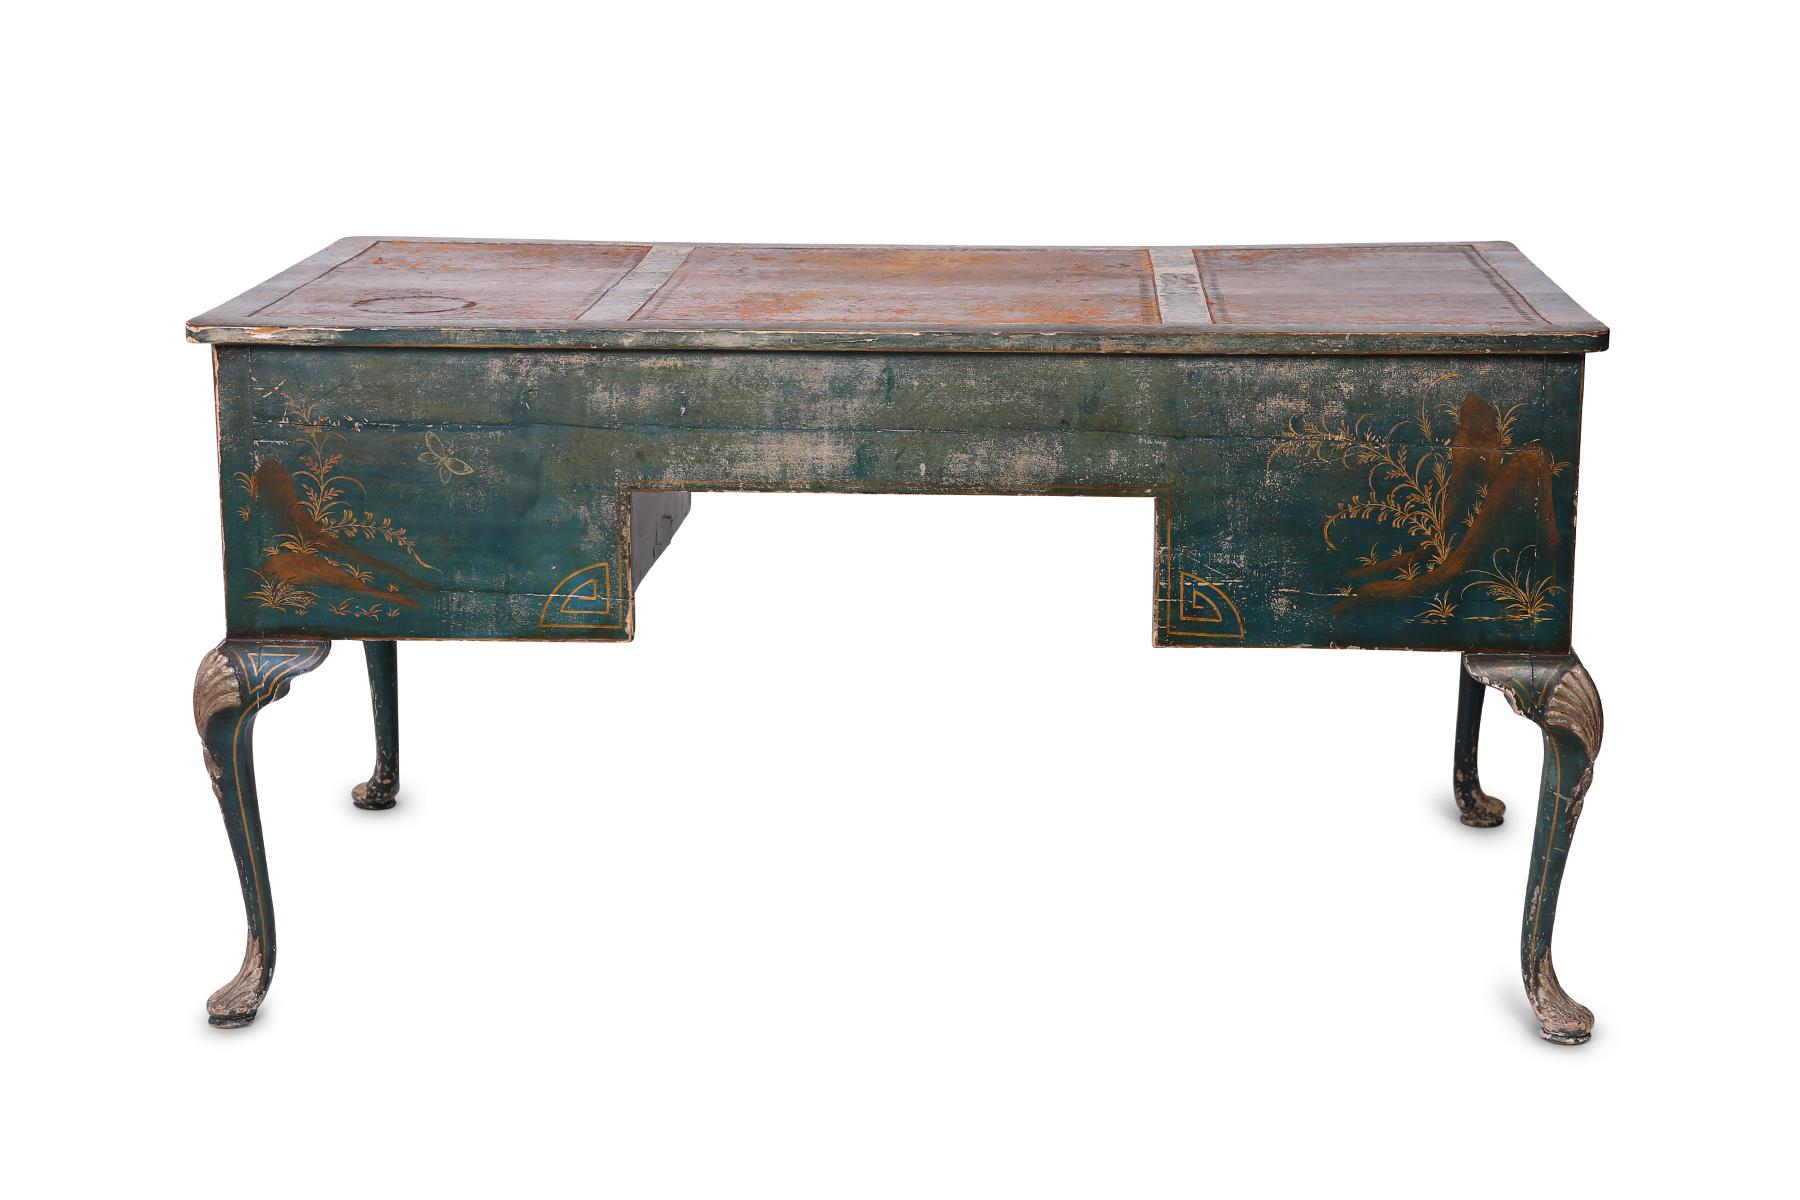 North American Green Turn-of-the-Century Patinated Desk